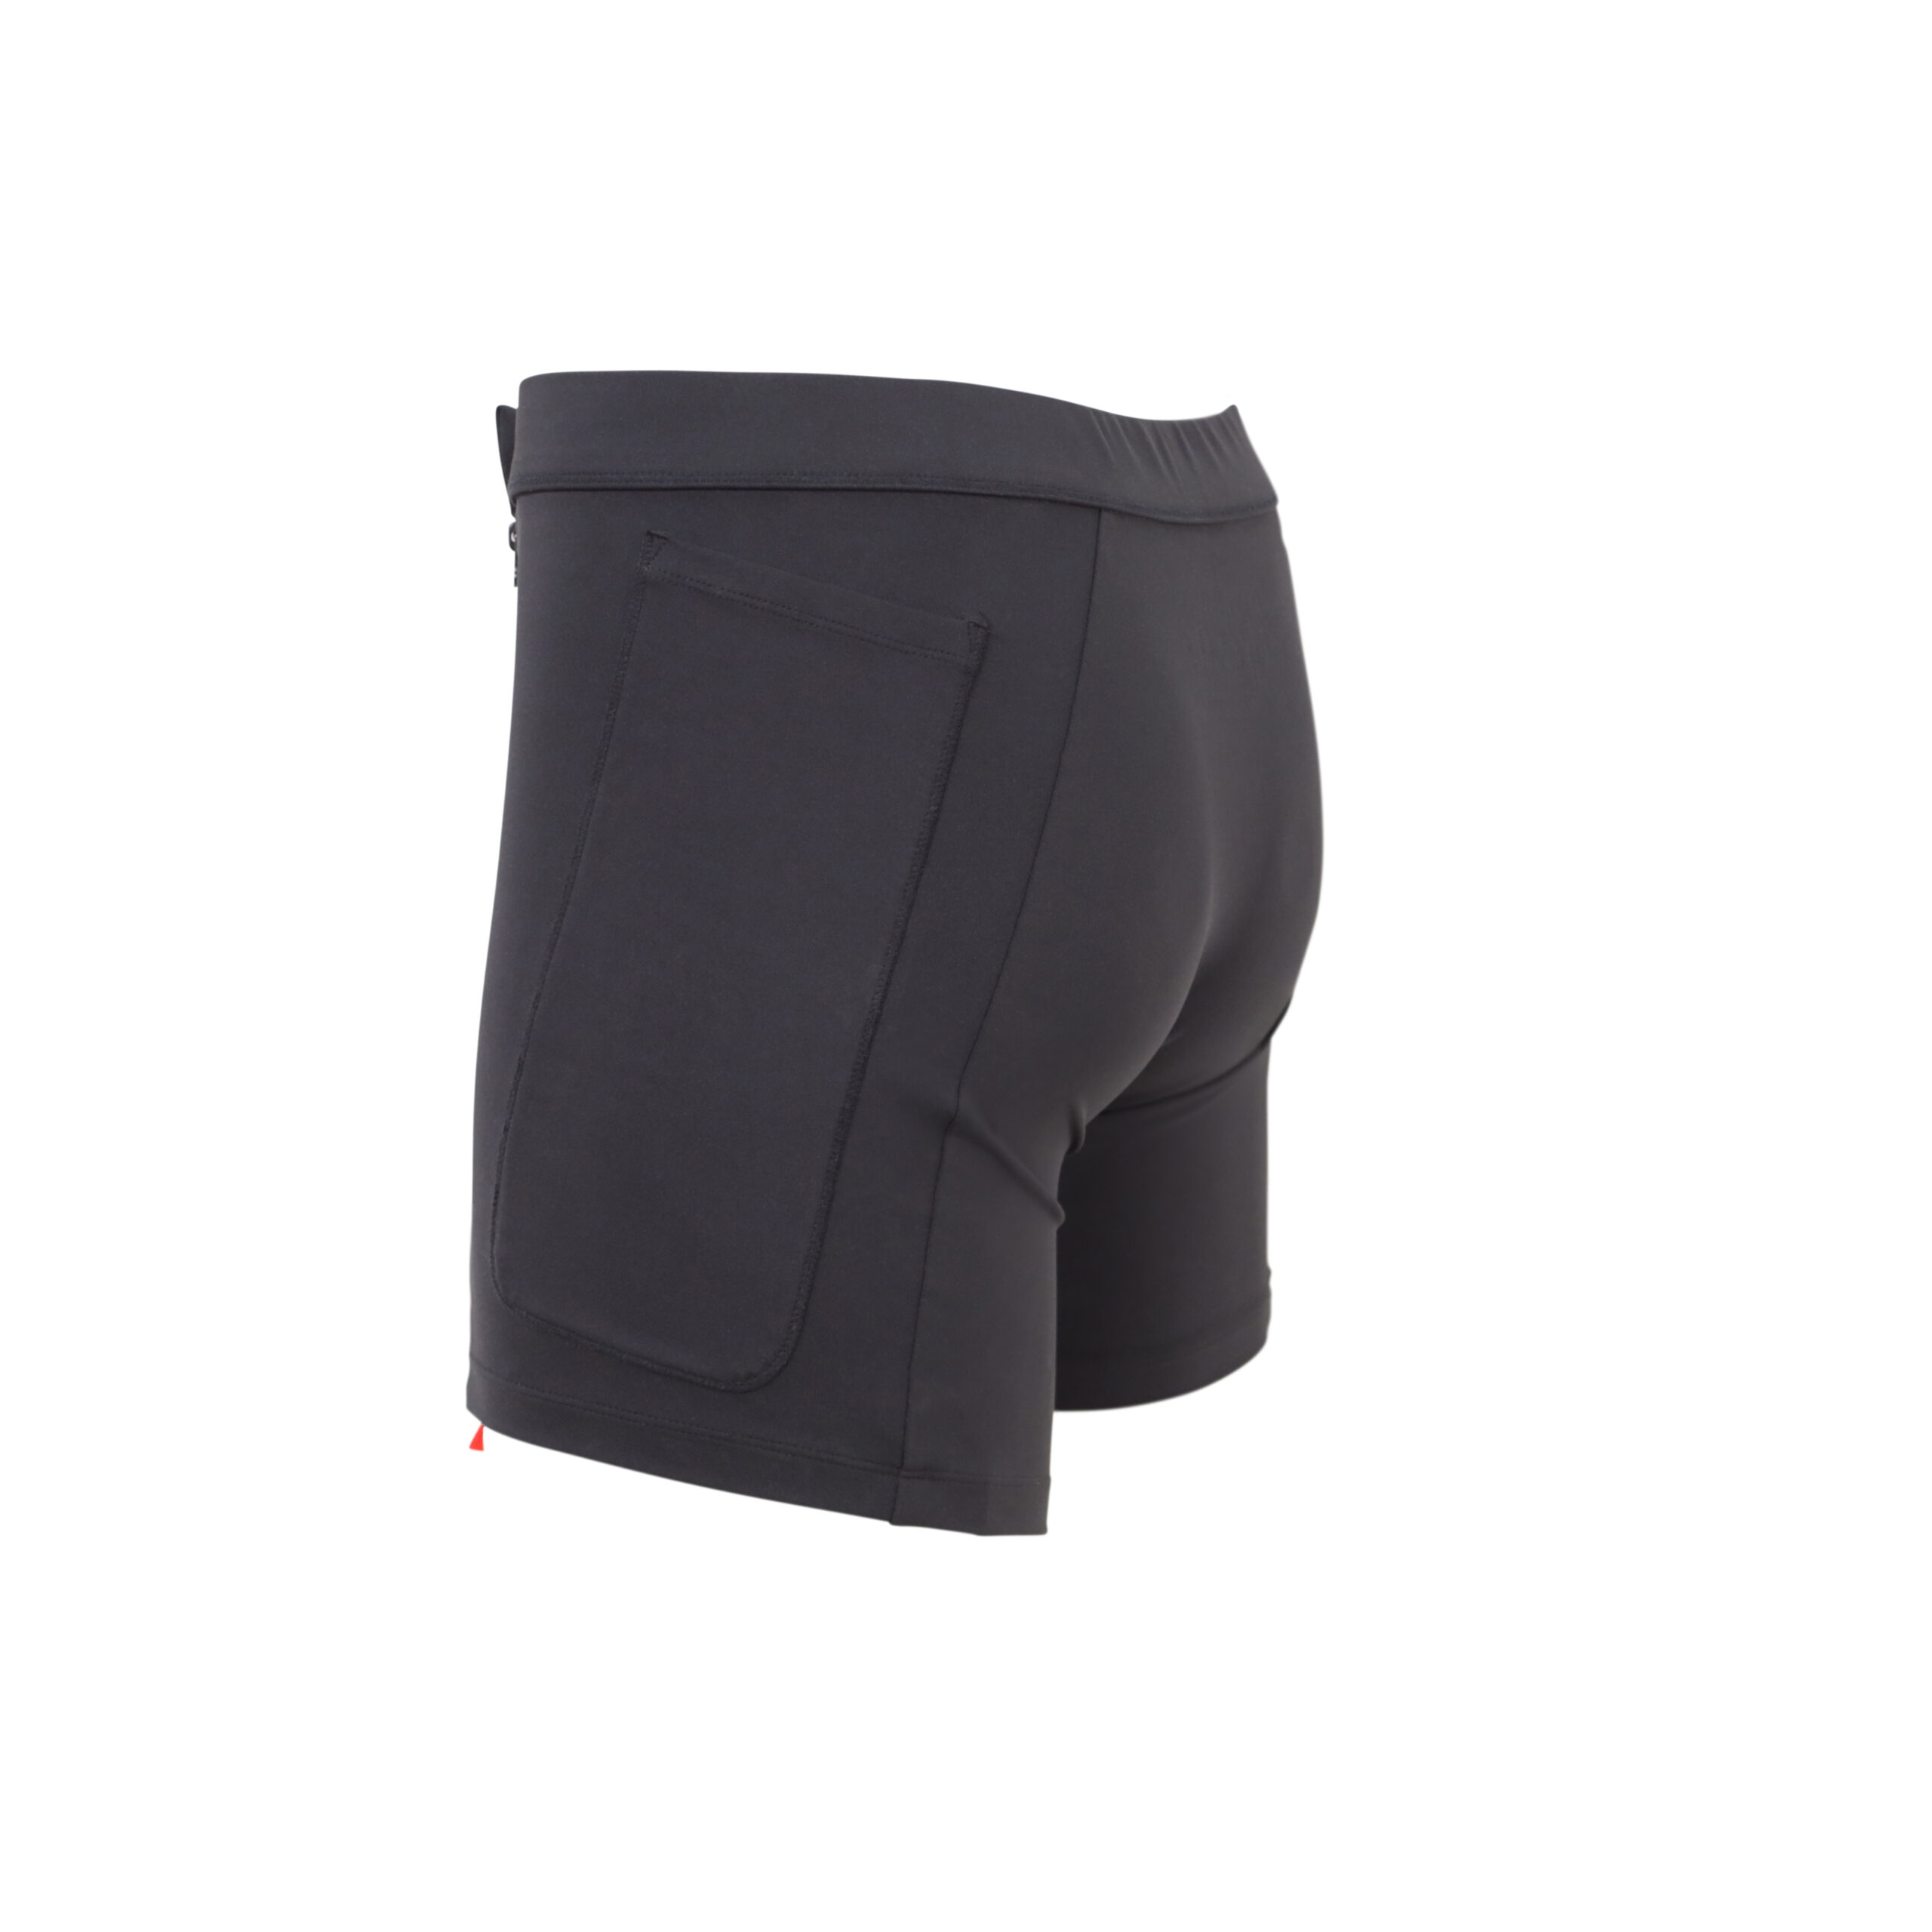 Engineered for post-surgery comfort, these black shorts feature a stretchy waistband and are specified as No-Bend Clothing for Hip Surgery.